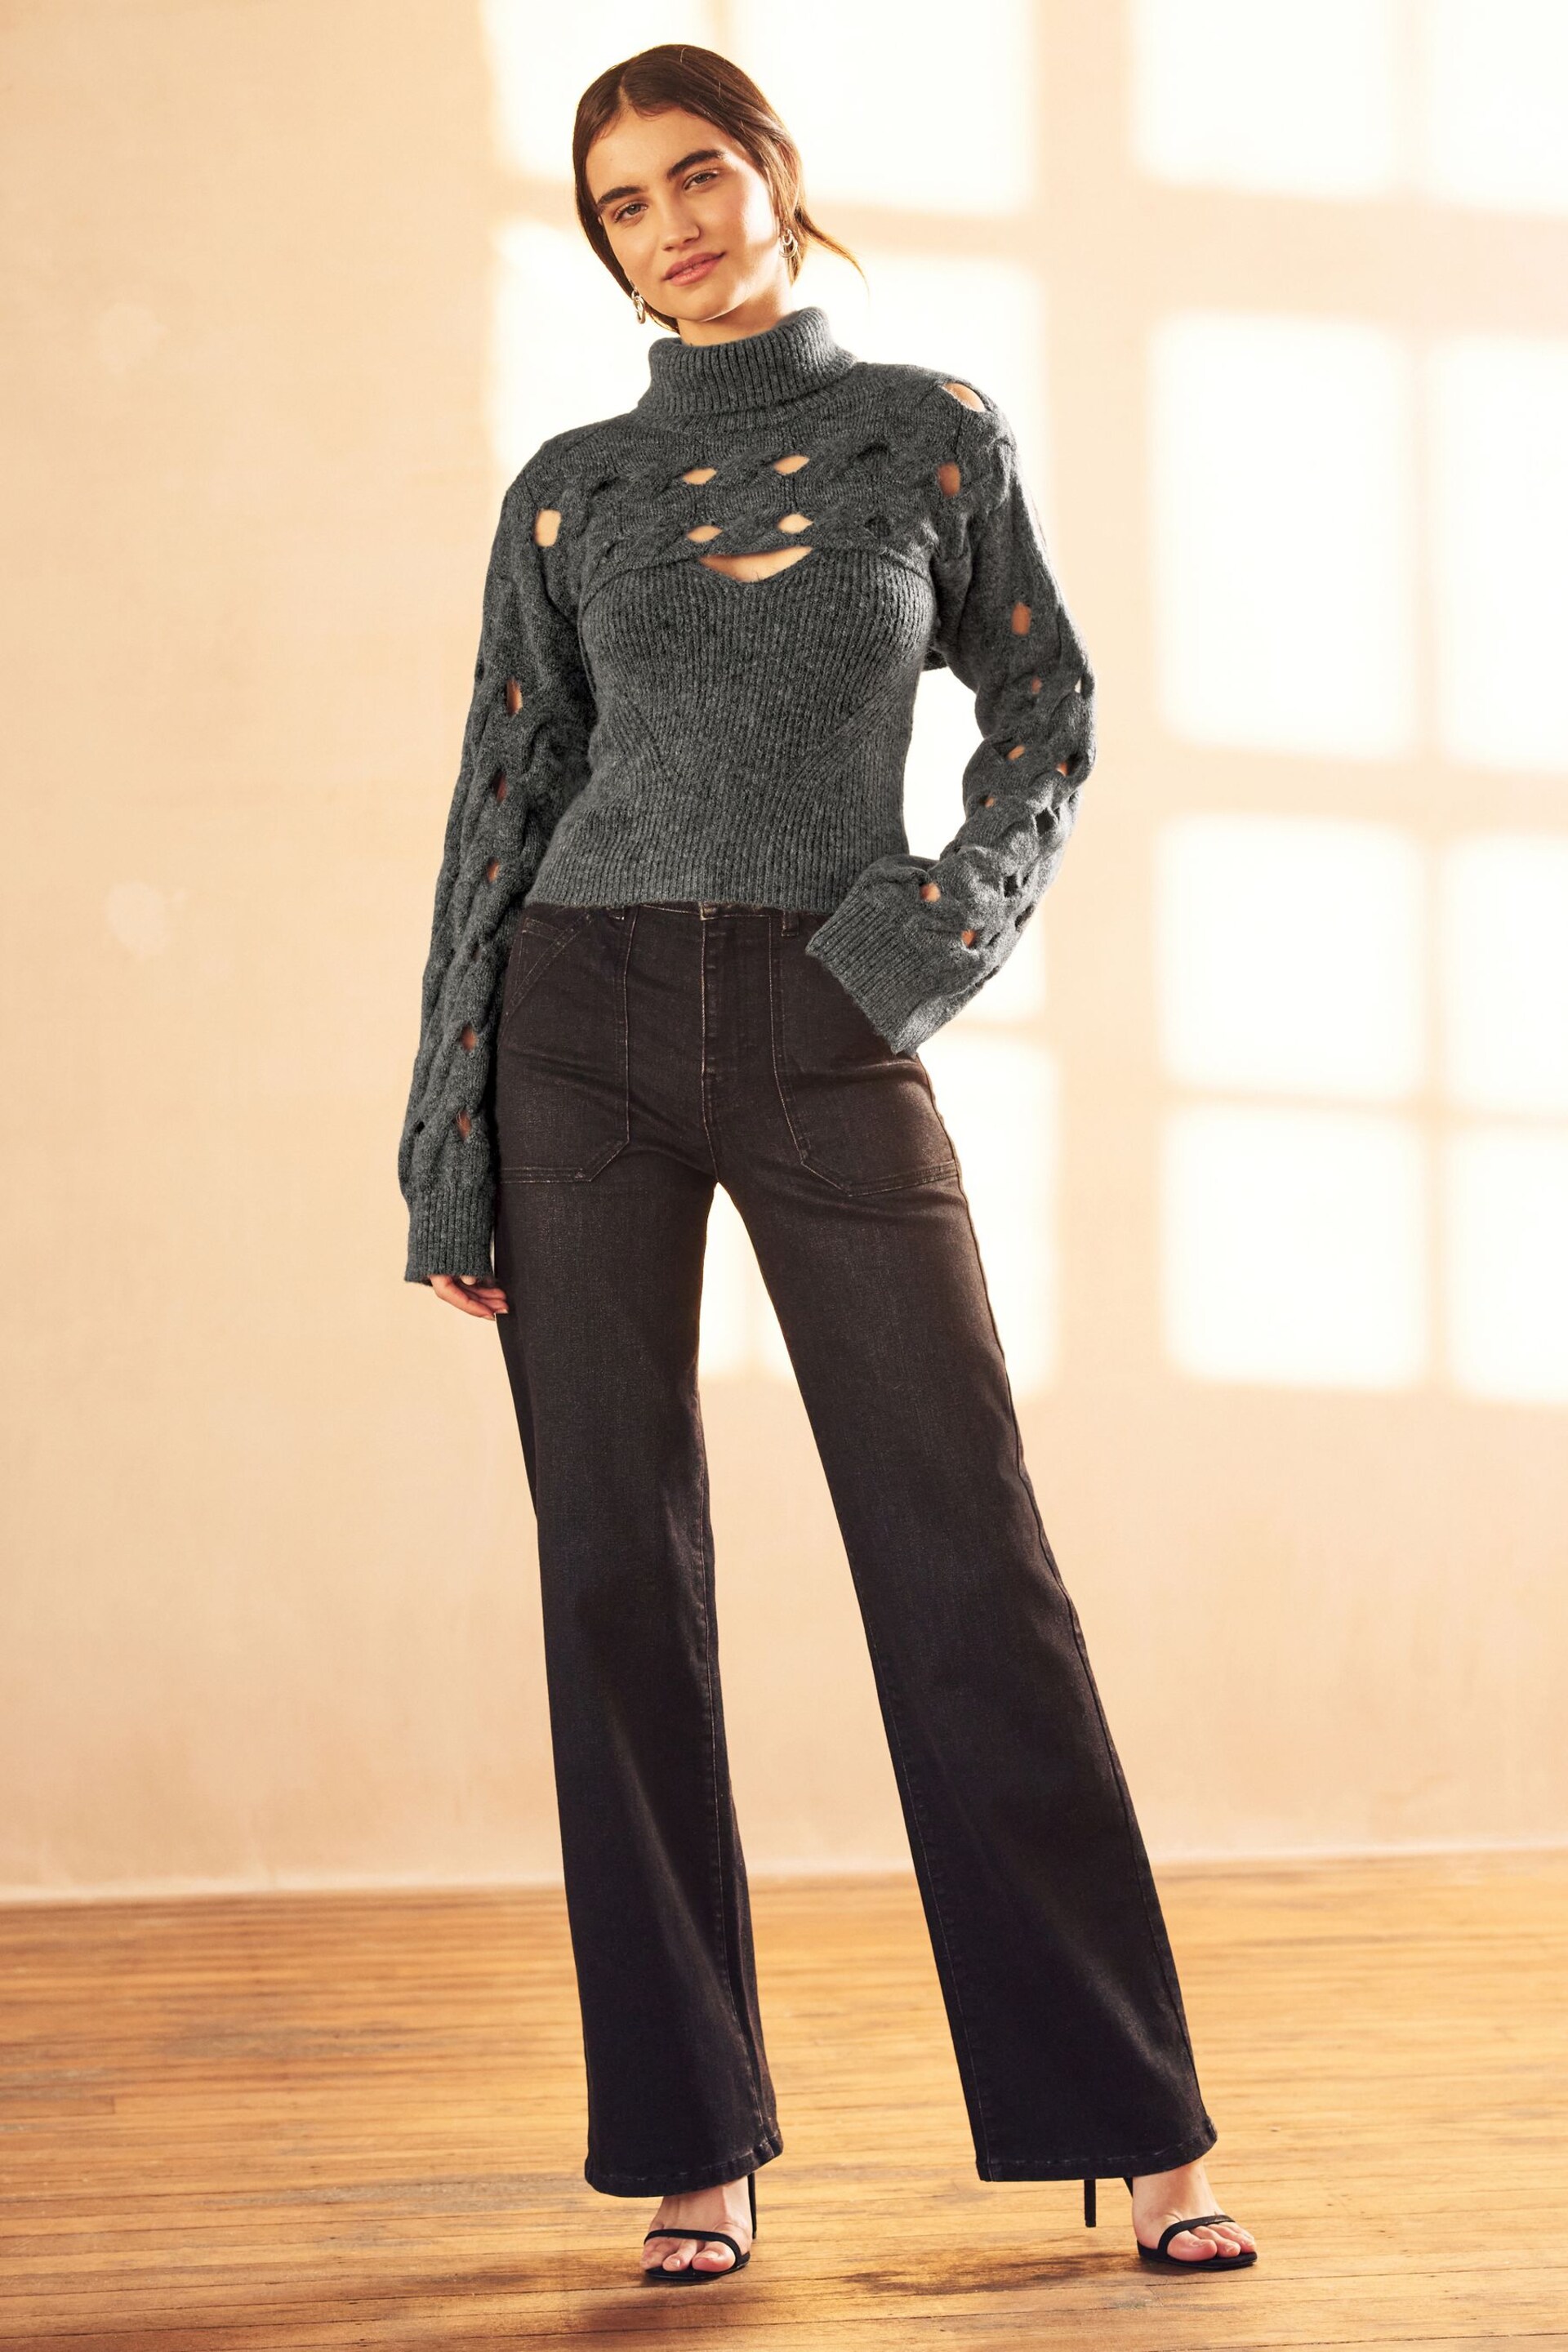 Charcoal Grey 2 In 1 Open Stitch Vest and Roll Neck Cropped Shrug Jumper - Image 2 of 8